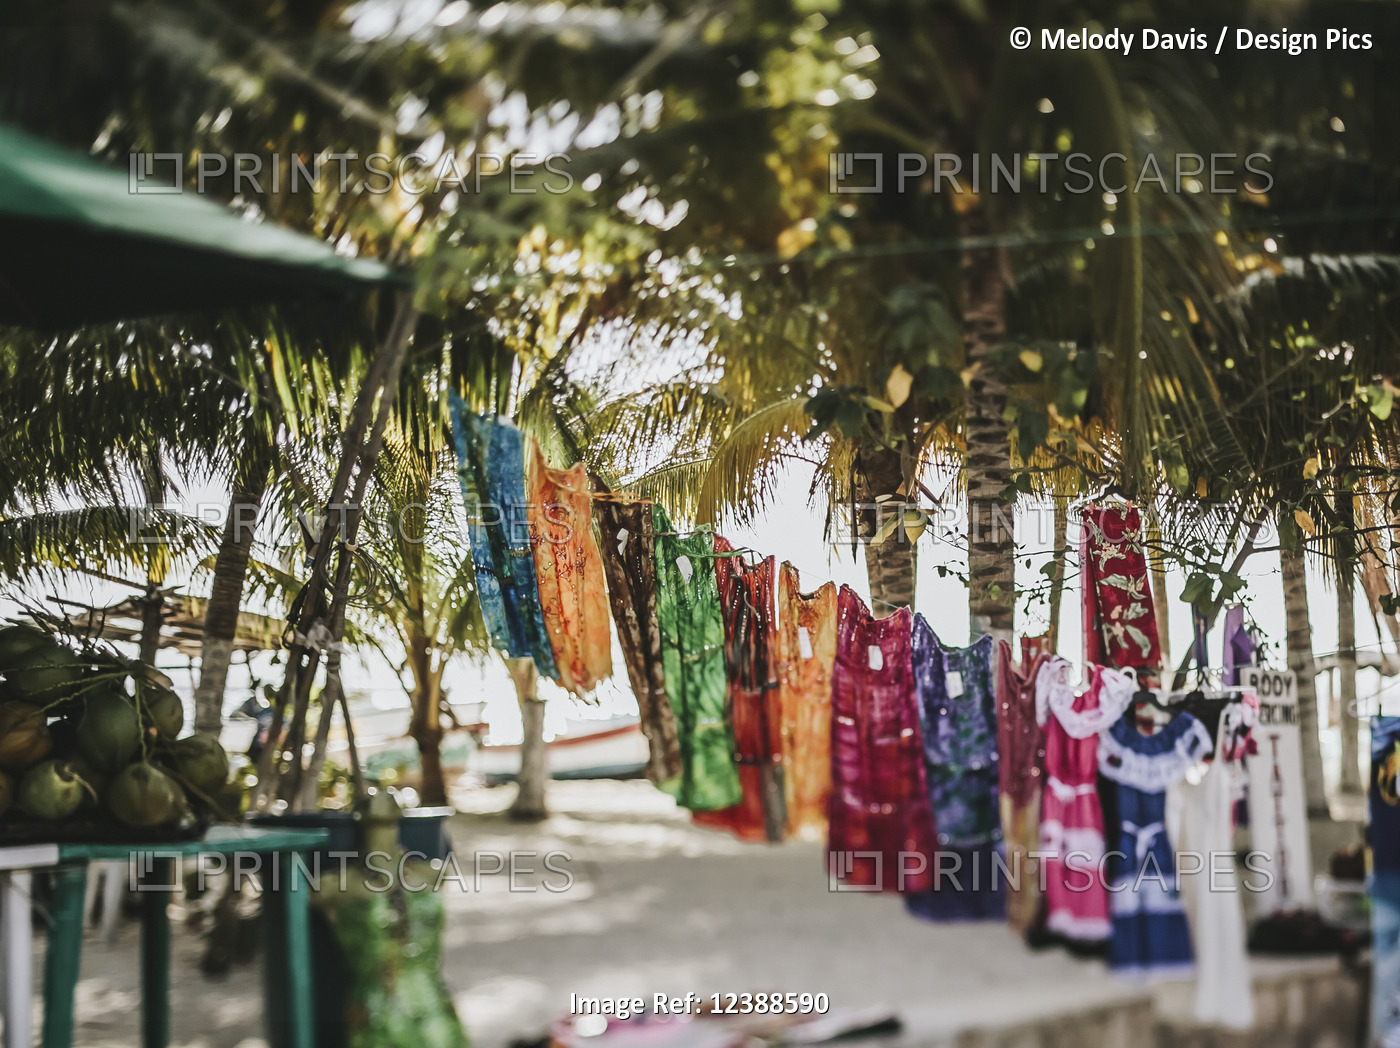 Clothing hanging on display for sale at an outdoor market; Cancun, Mexico